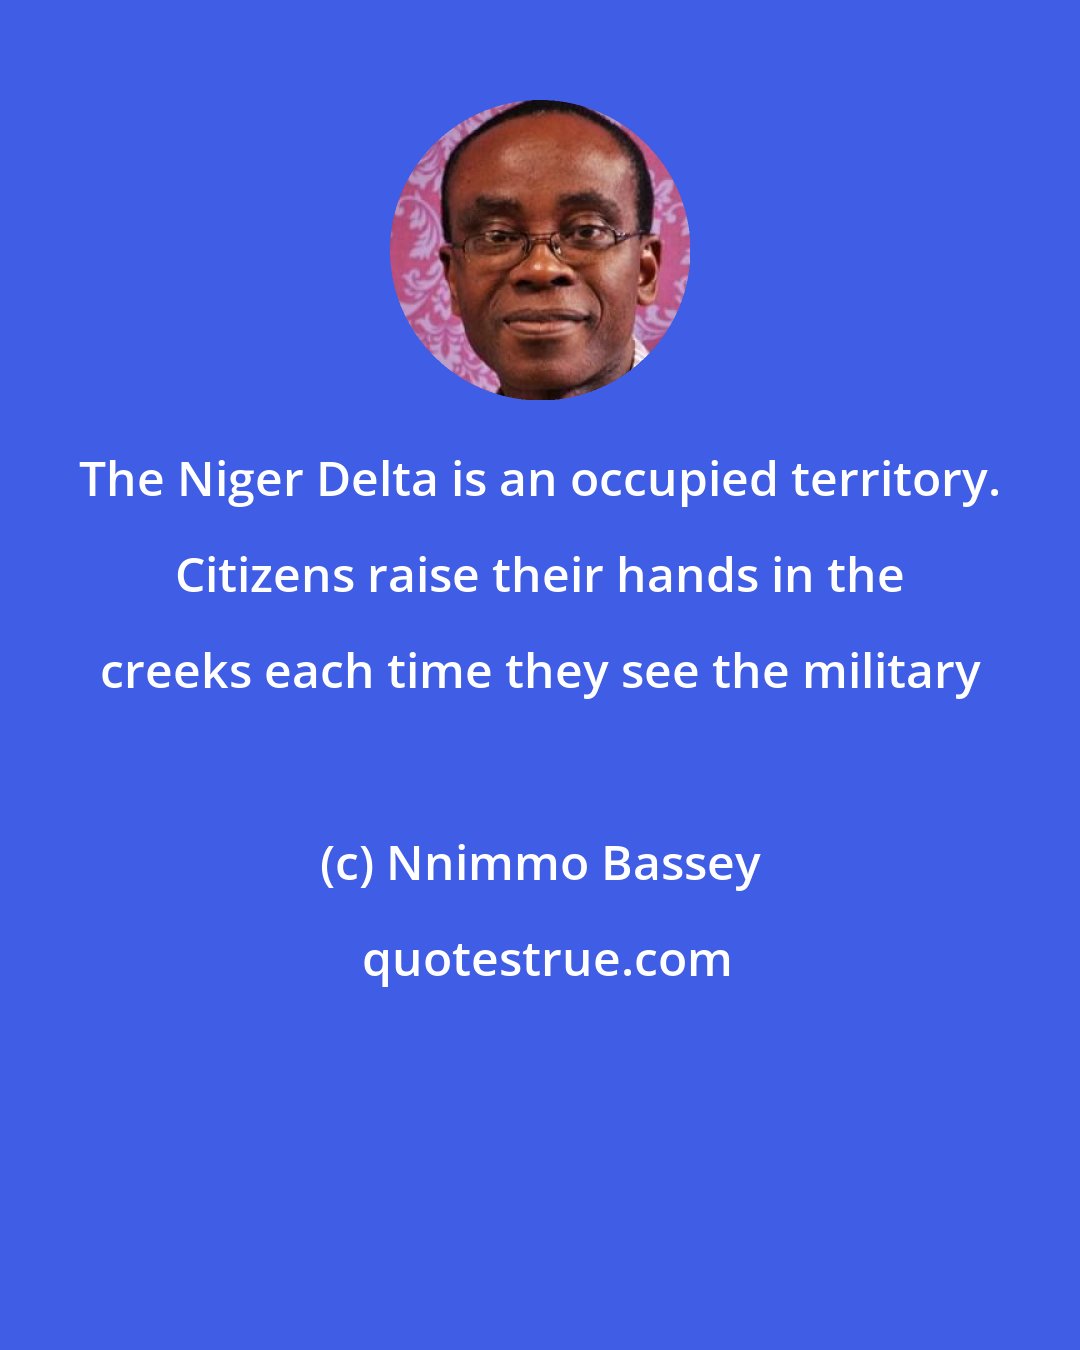 Nnimmo Bassey: The Niger Delta is an occupied territory. Citizens raise their hands in the creeks each time they see the military